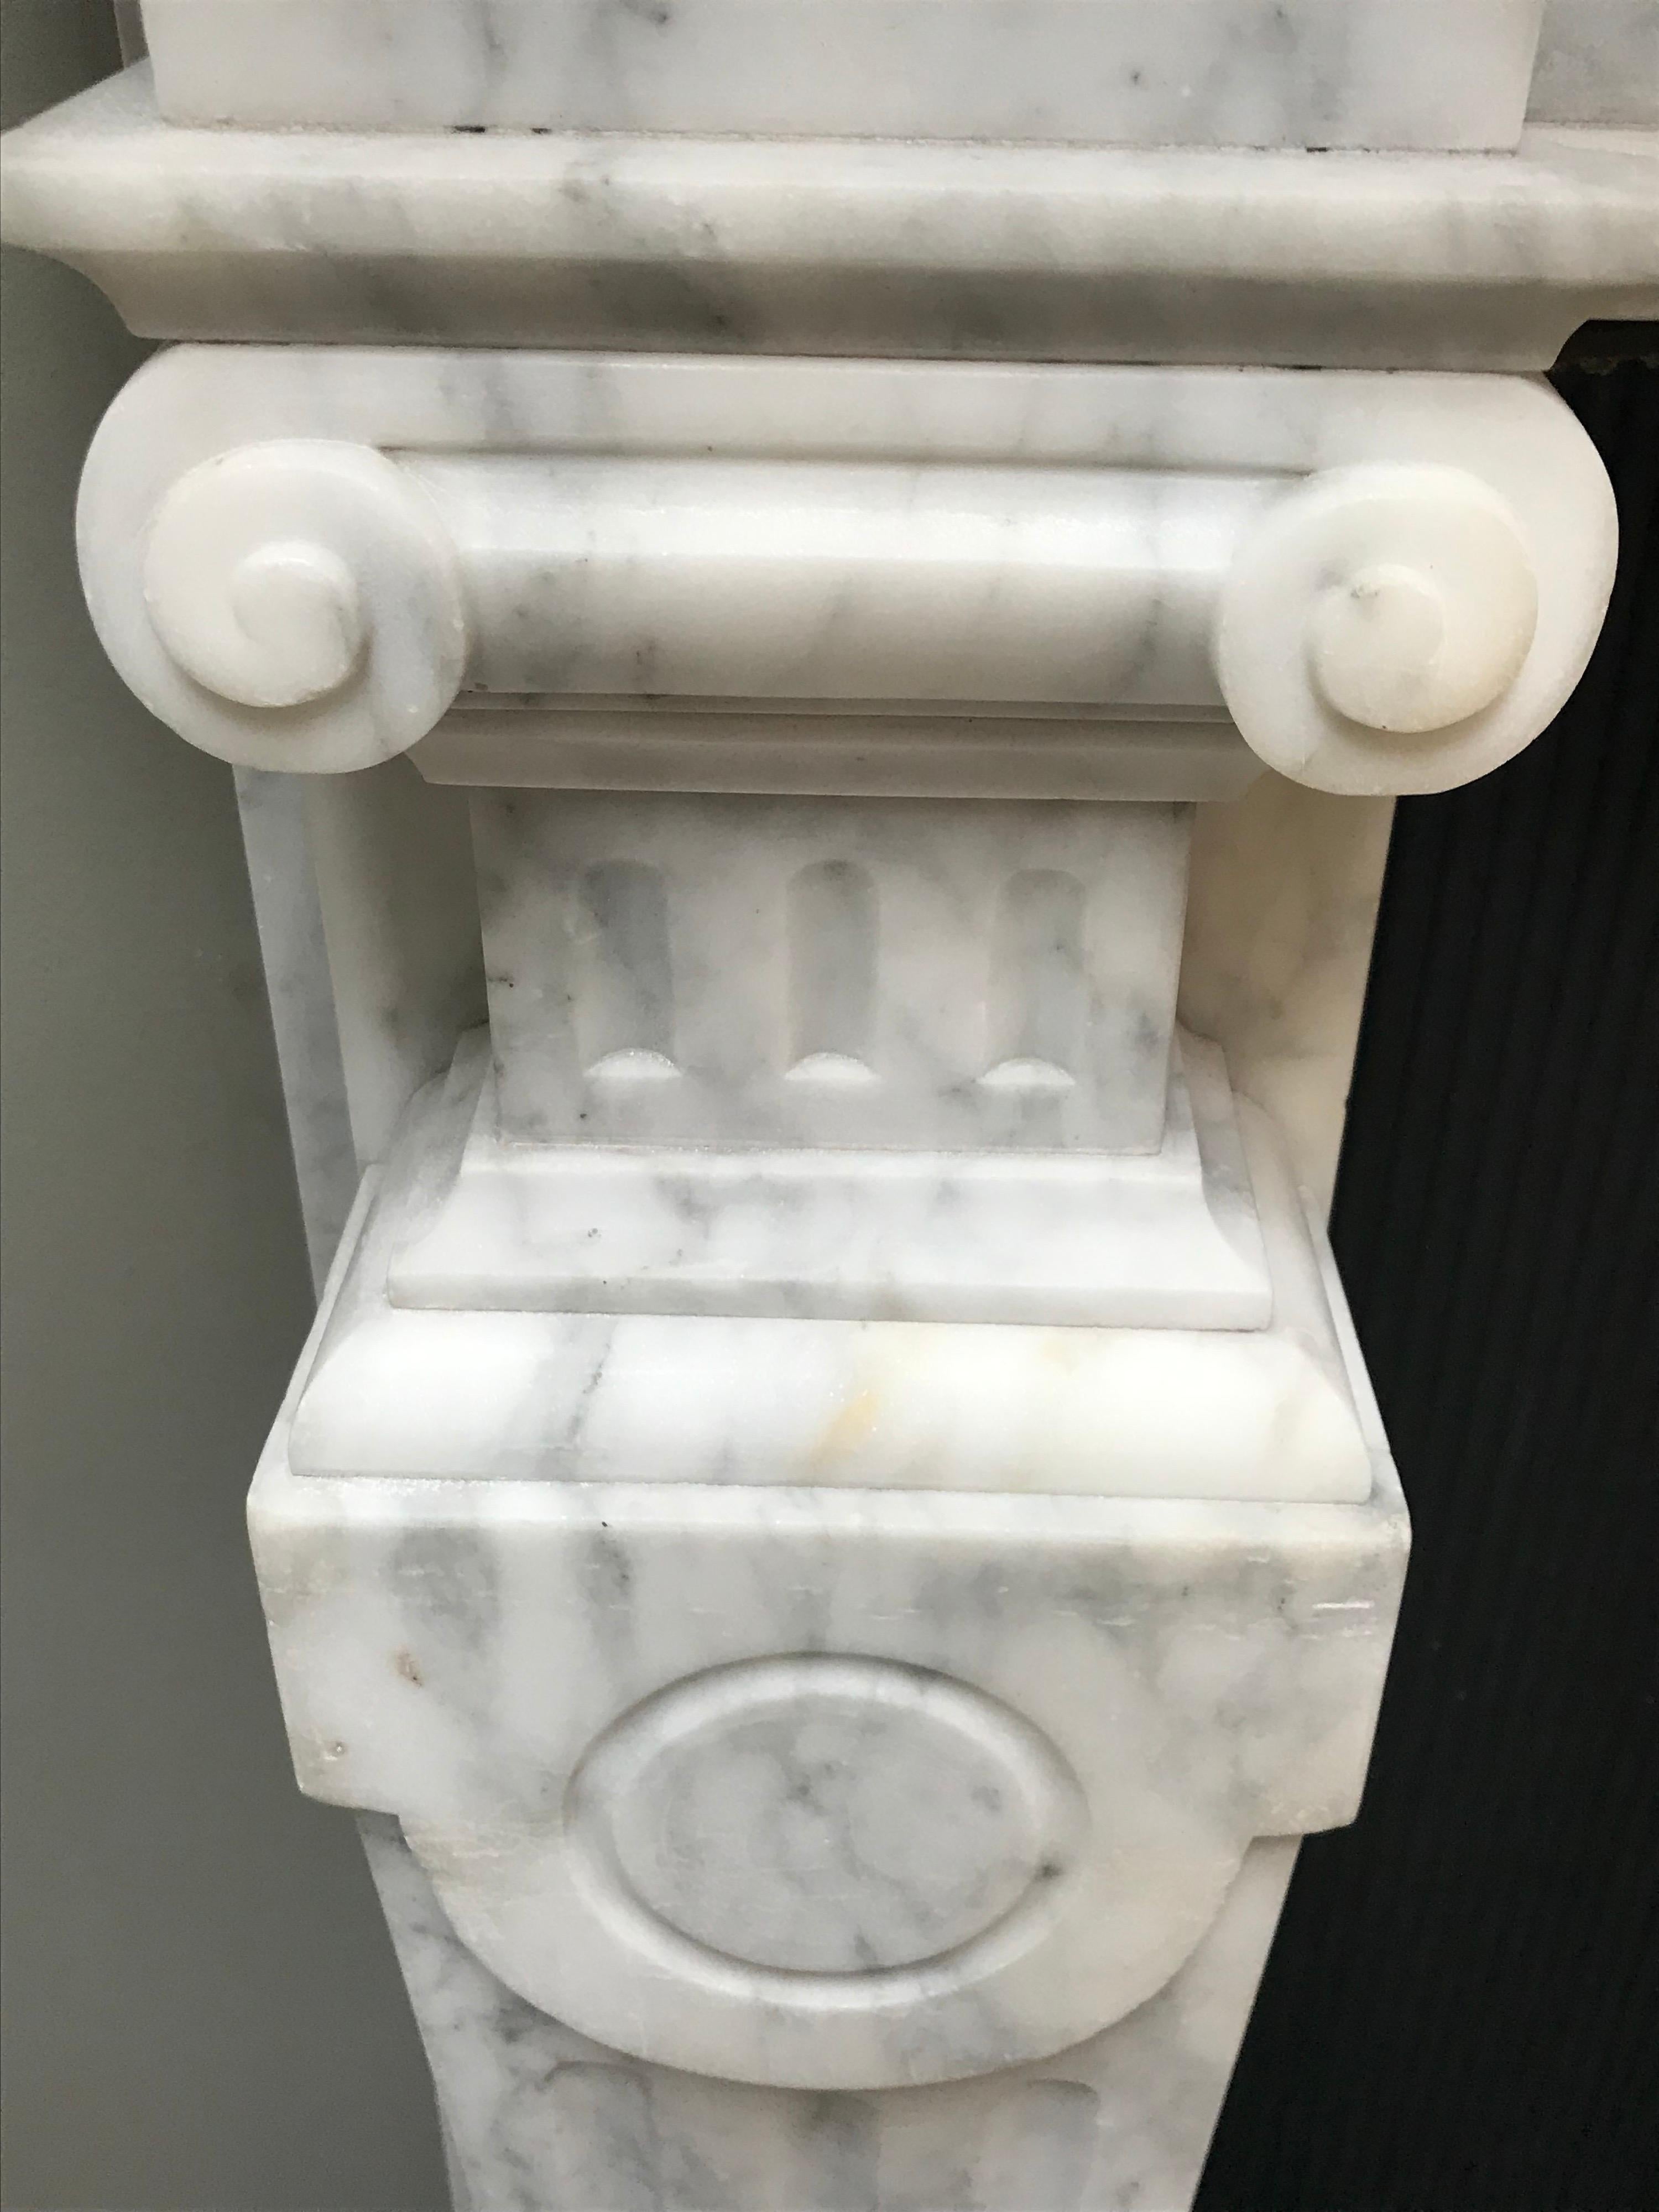 19th century fine English Victorian statuary honed marble fireplace surround.
Hand carved with fluted pilasters tapered jambs. With fine ornamental tablets
On recessed paneling above the capitals and its centre block.
This true glorious bold example